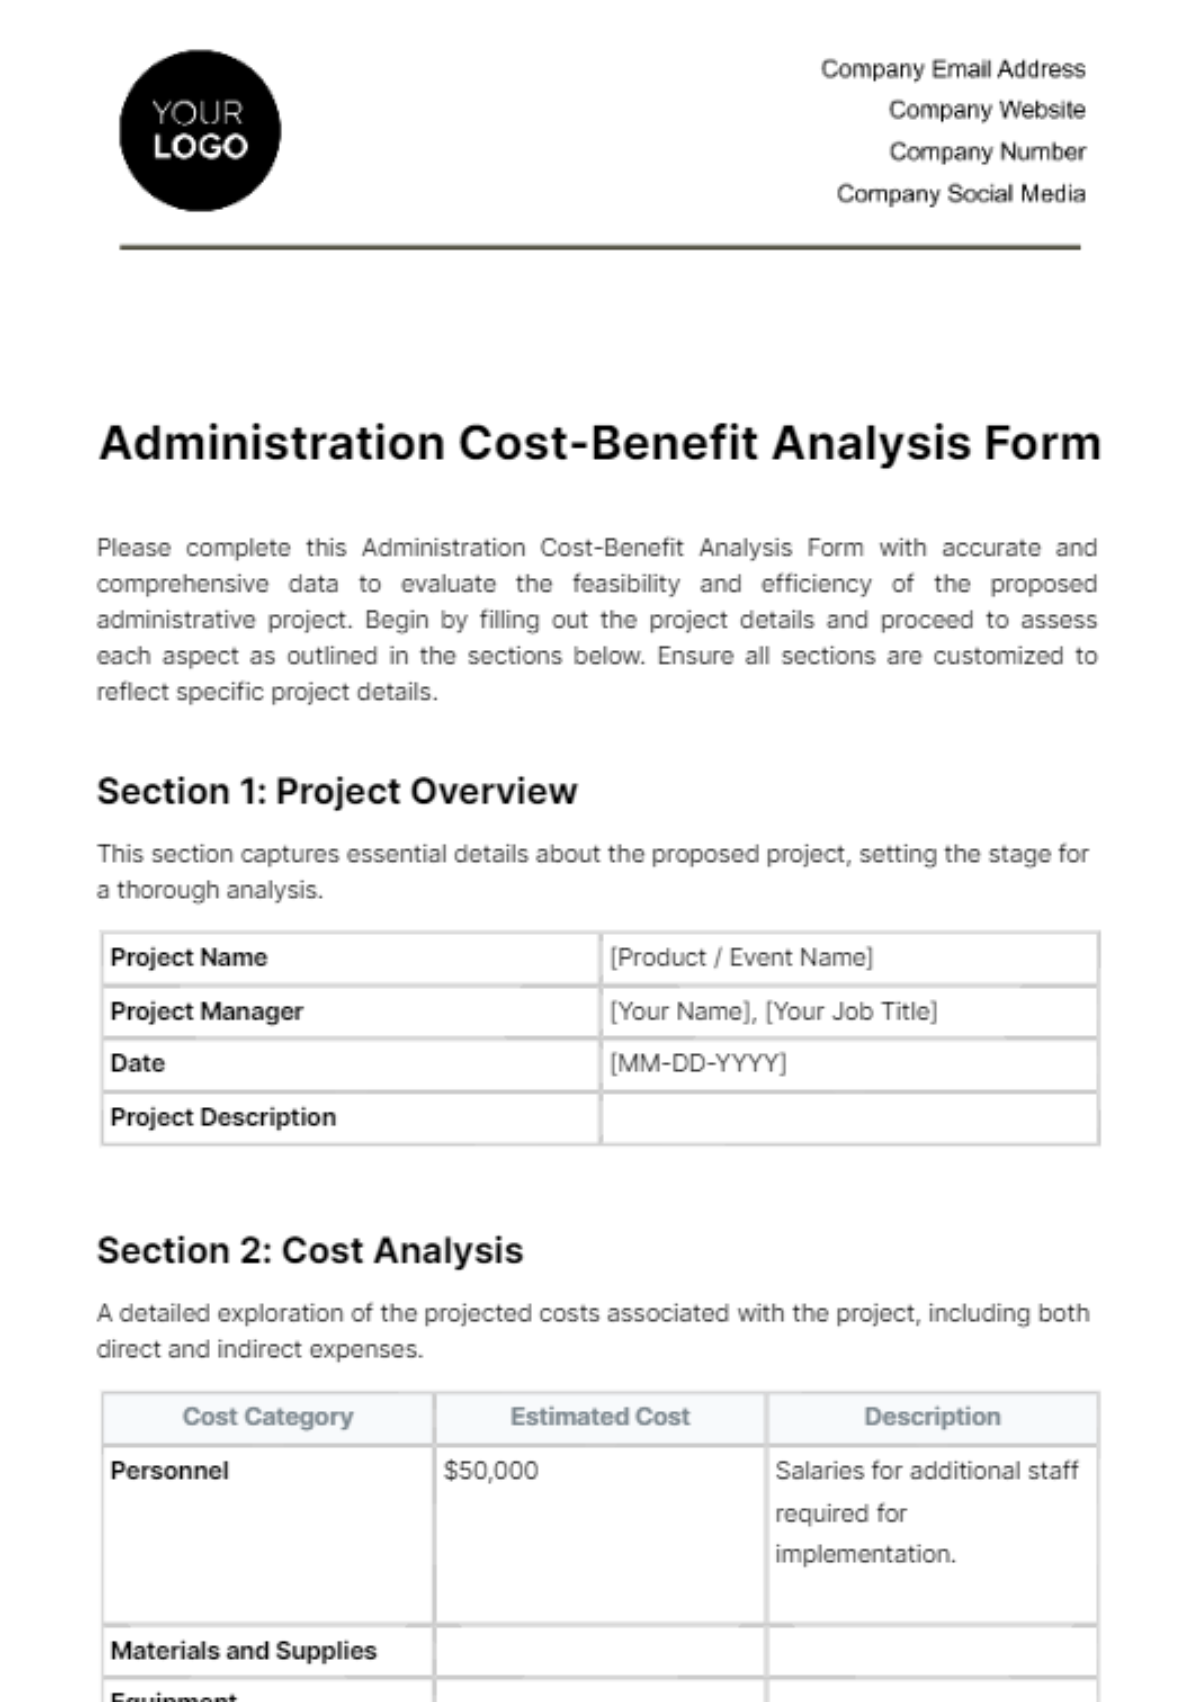 Free Administration Cost-Benefit Analysis Form Template